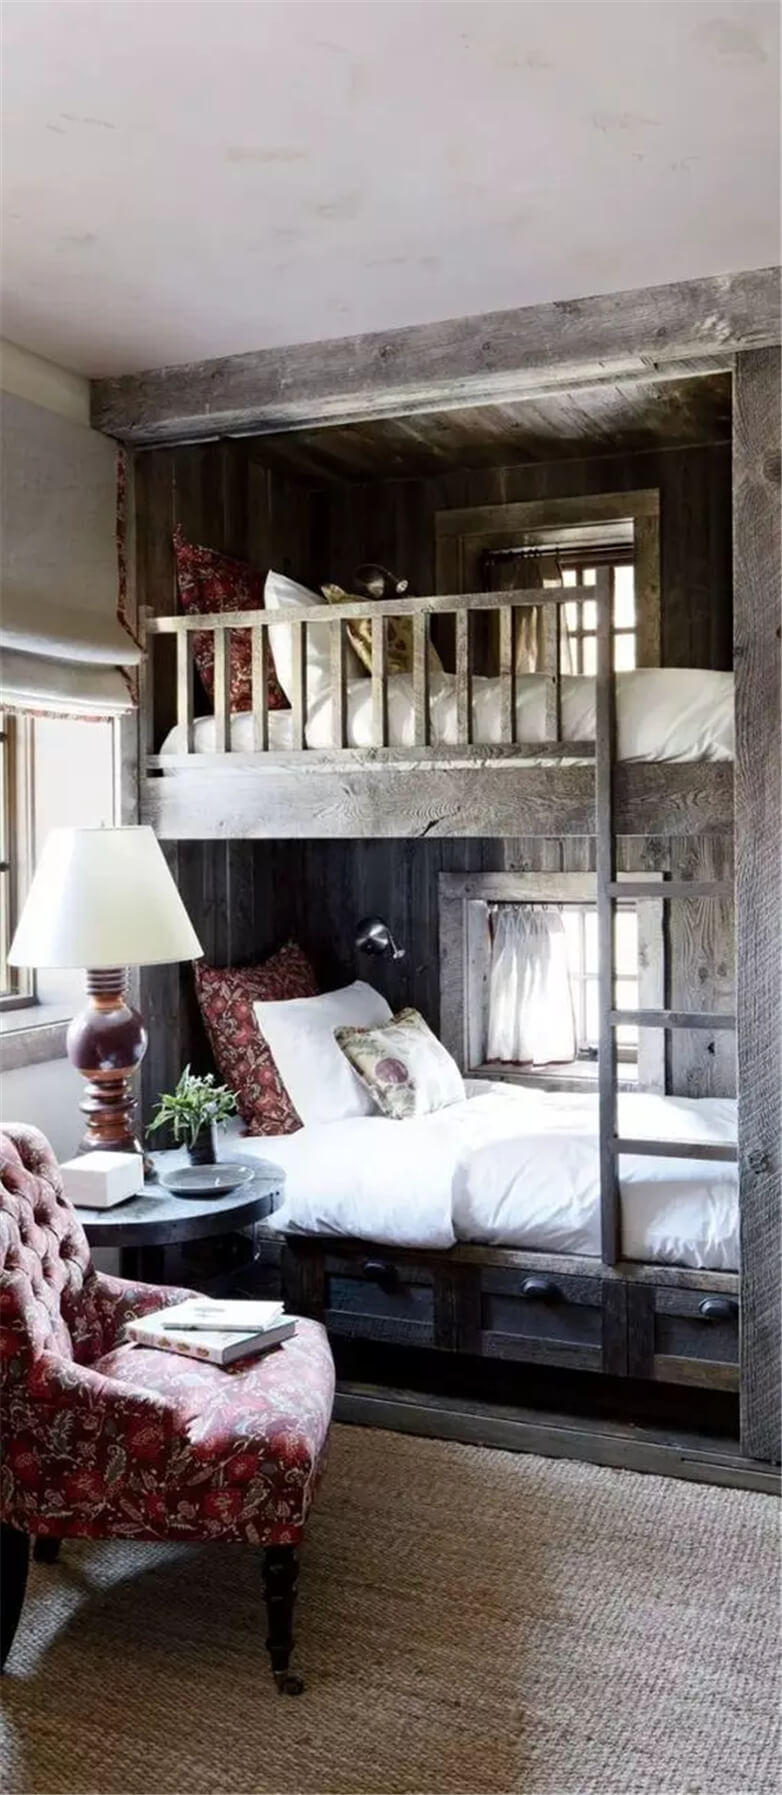 Bunk Beds with a Chair for Reading